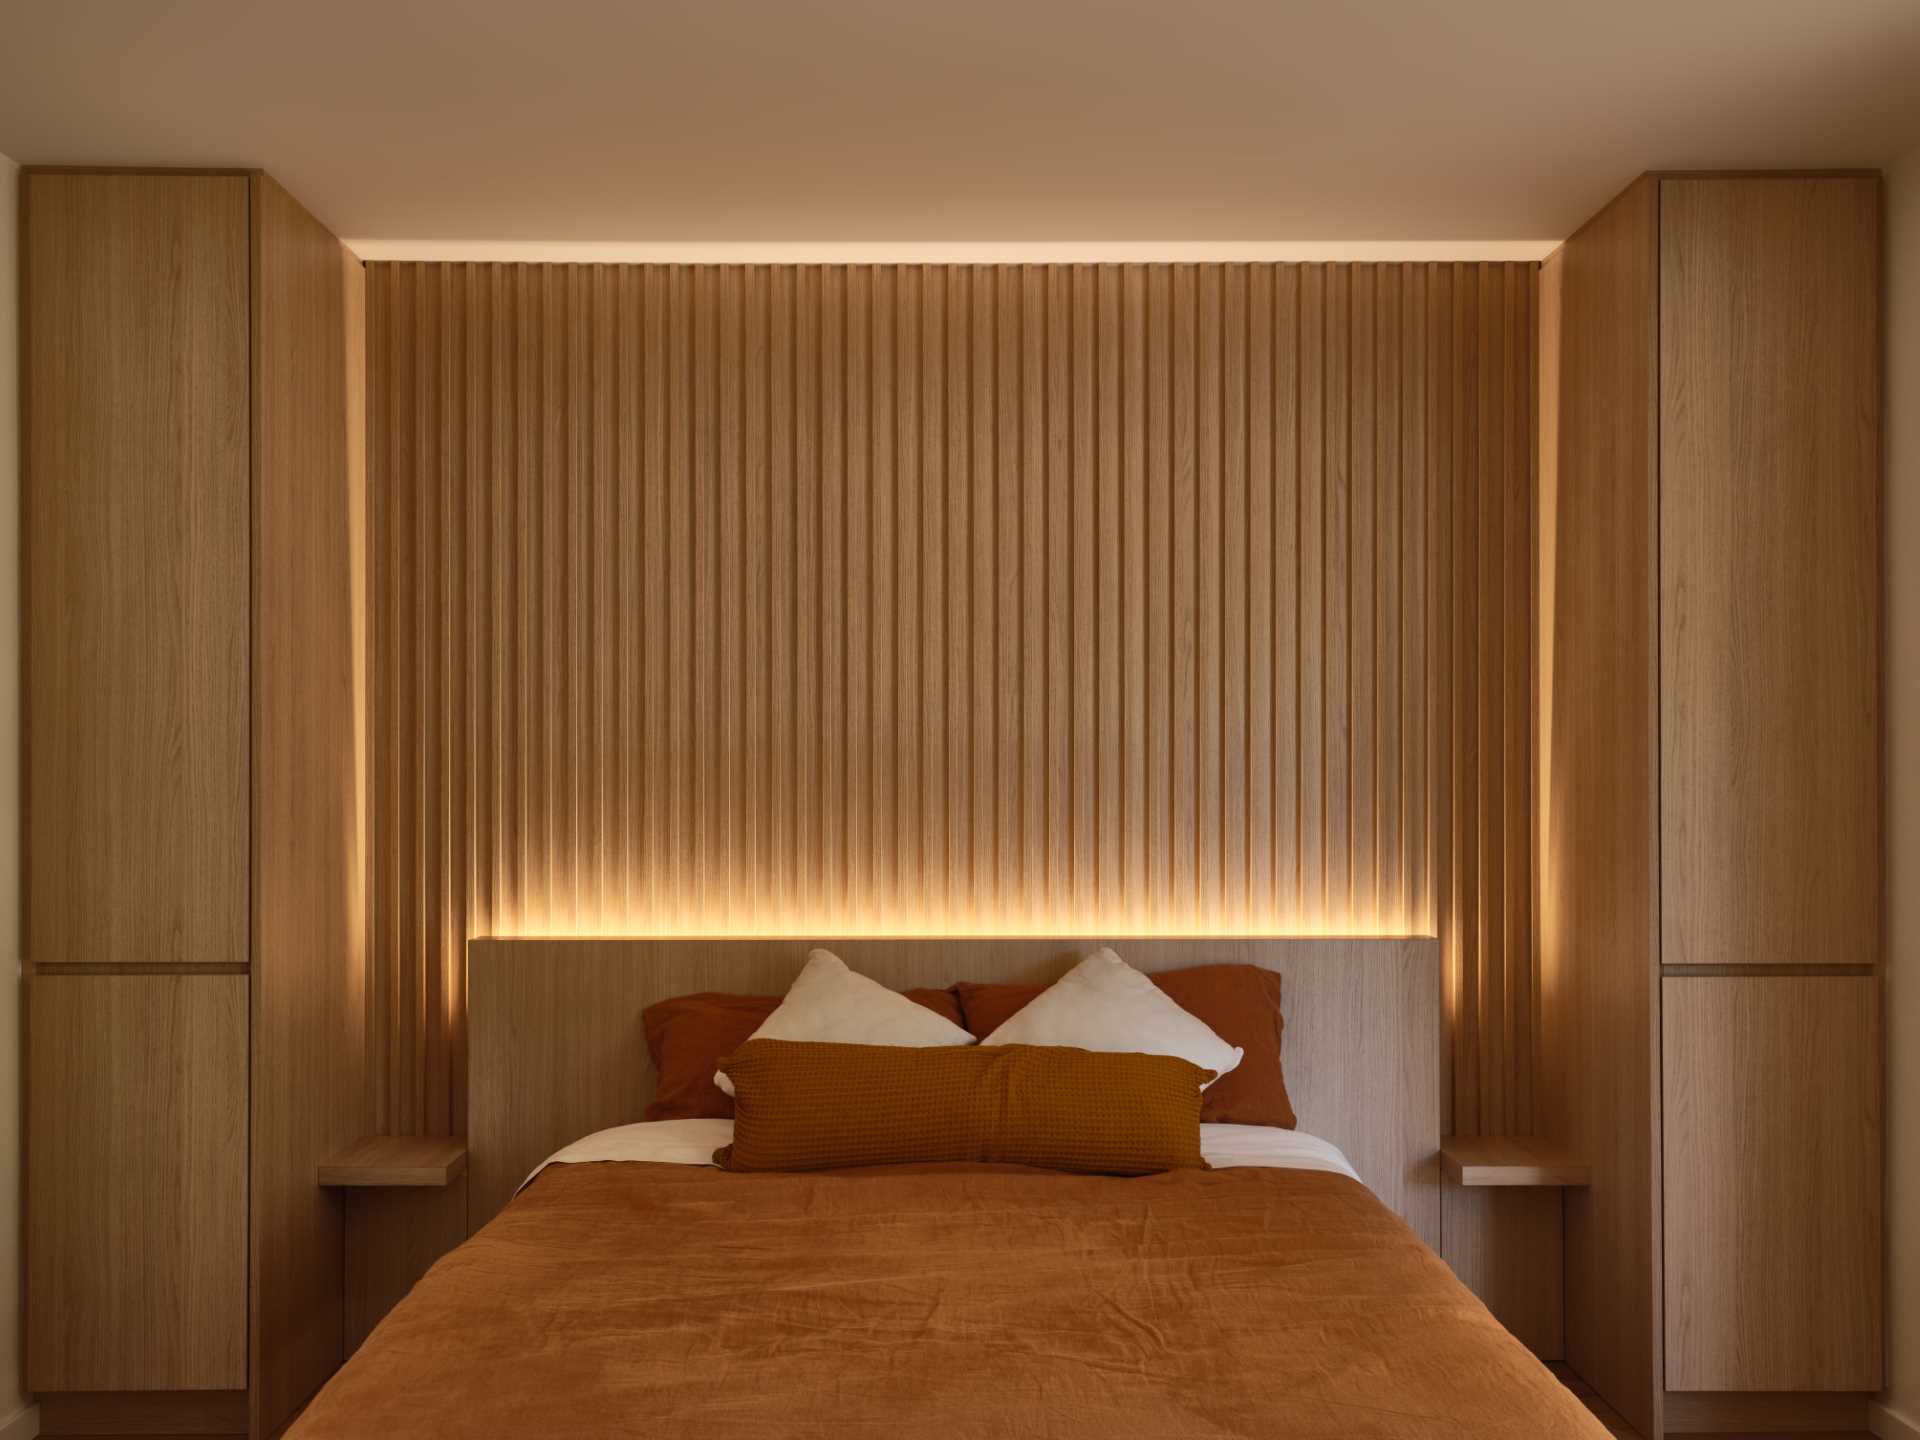 A modern wood-lined bedroom with hidden lighting.